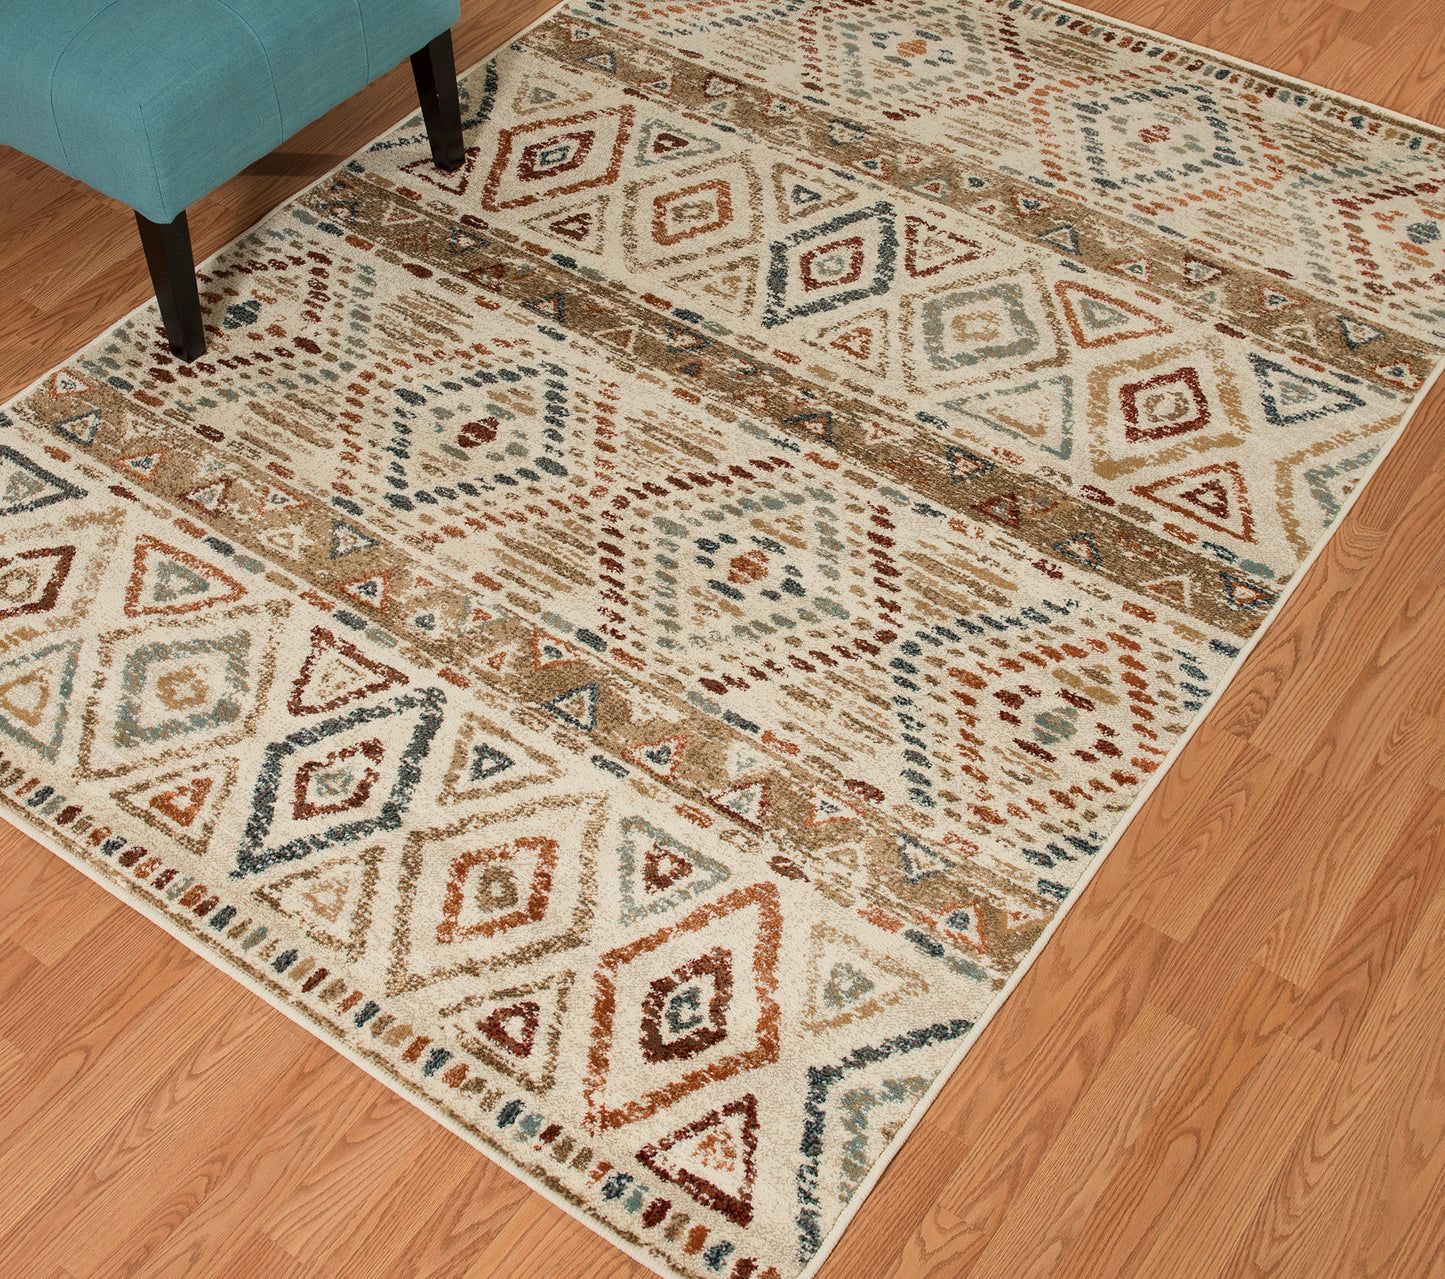 3001-Salto Grande Synthetic Blend Indoor Area Rug by United Weavers